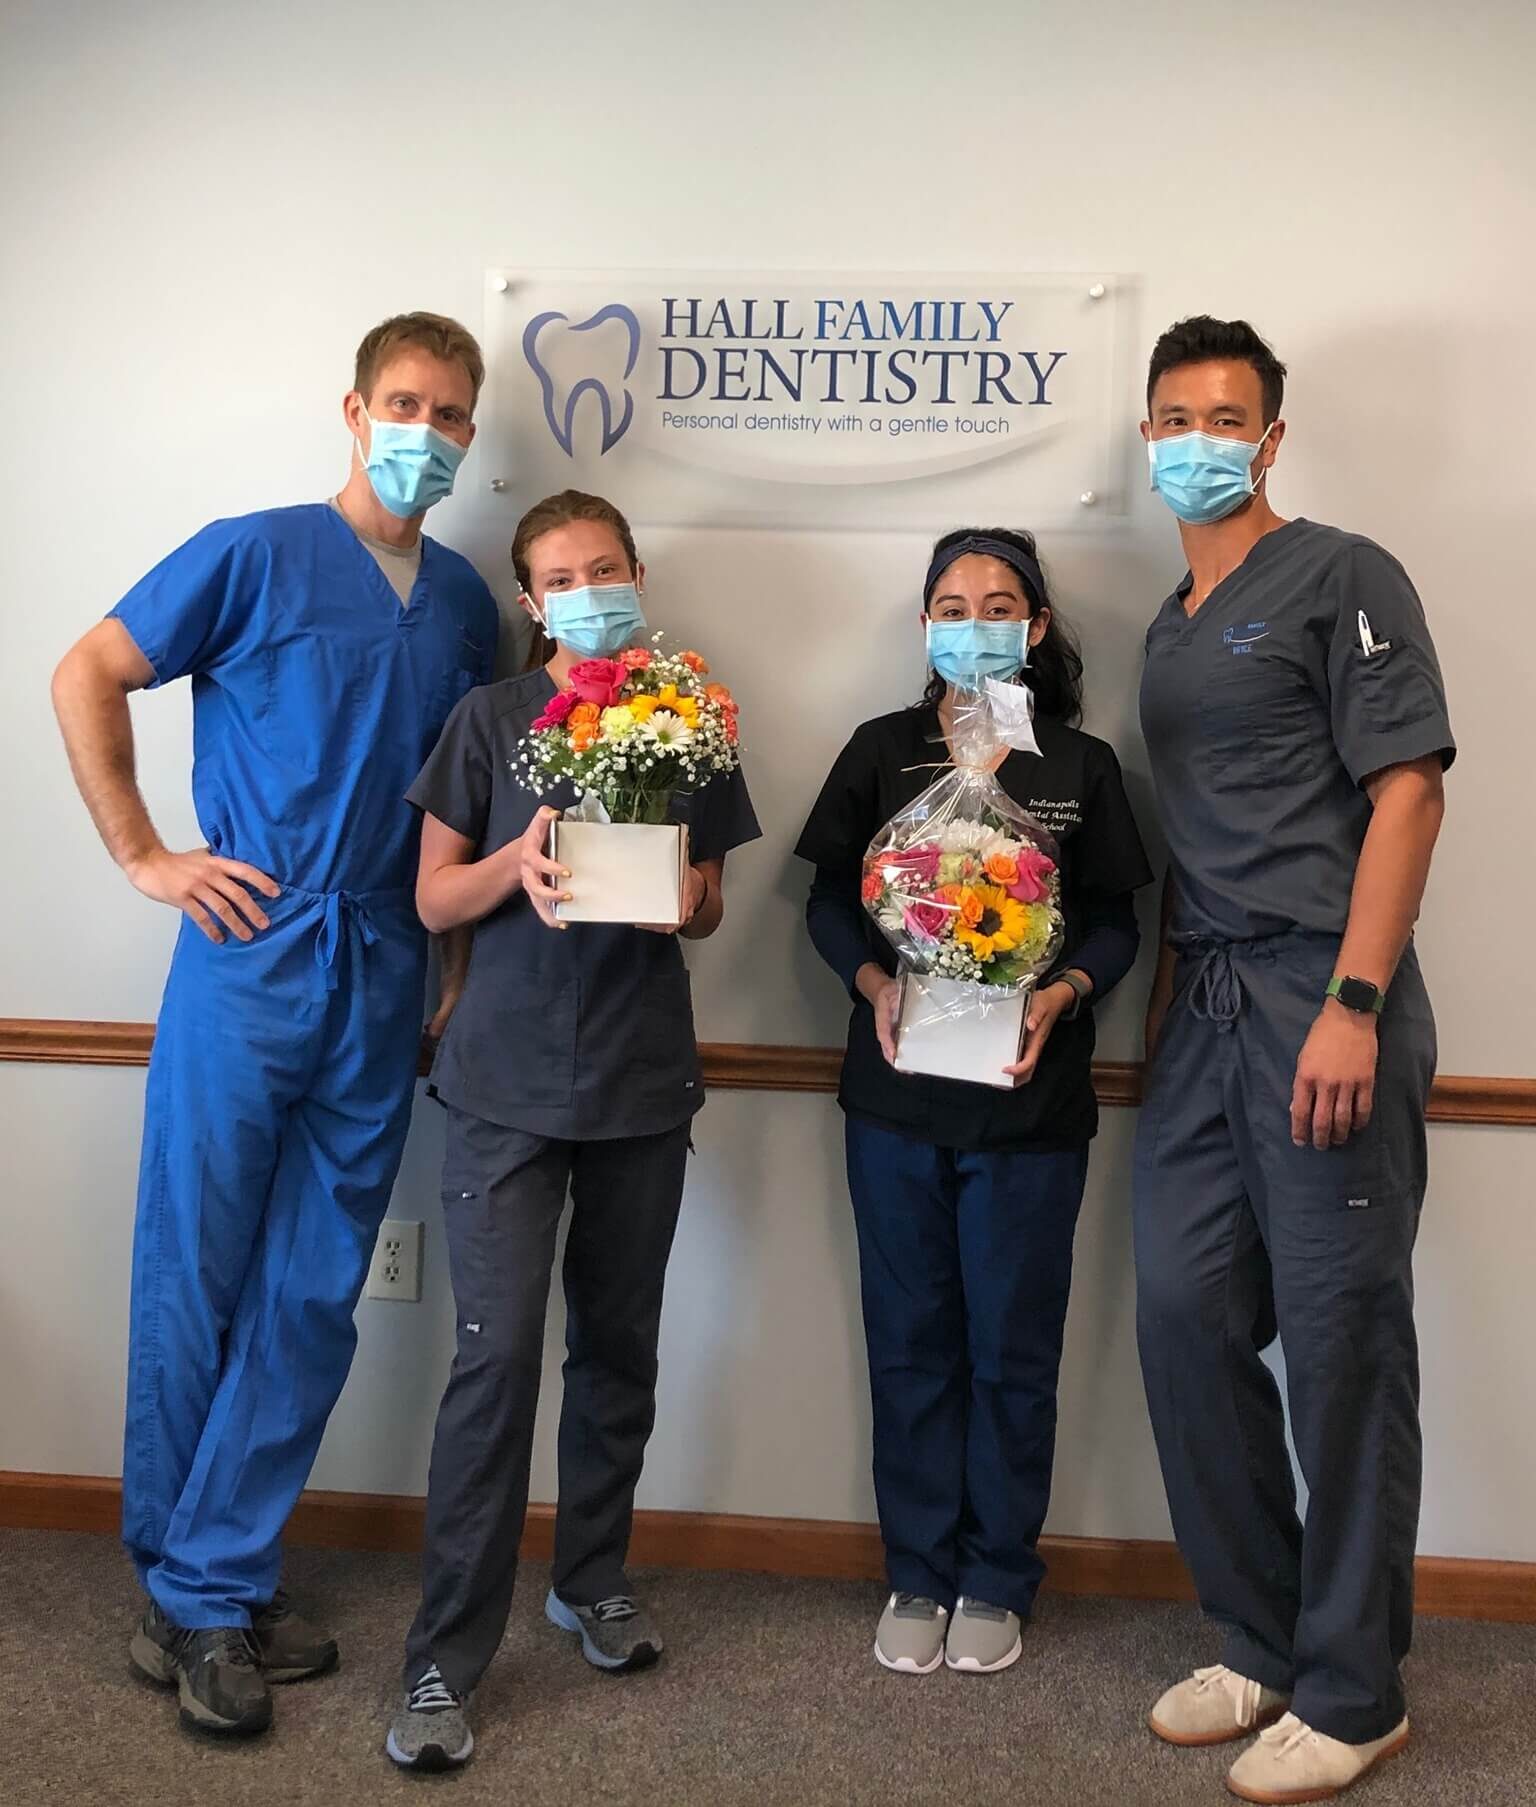 Dr. Hall and Team members